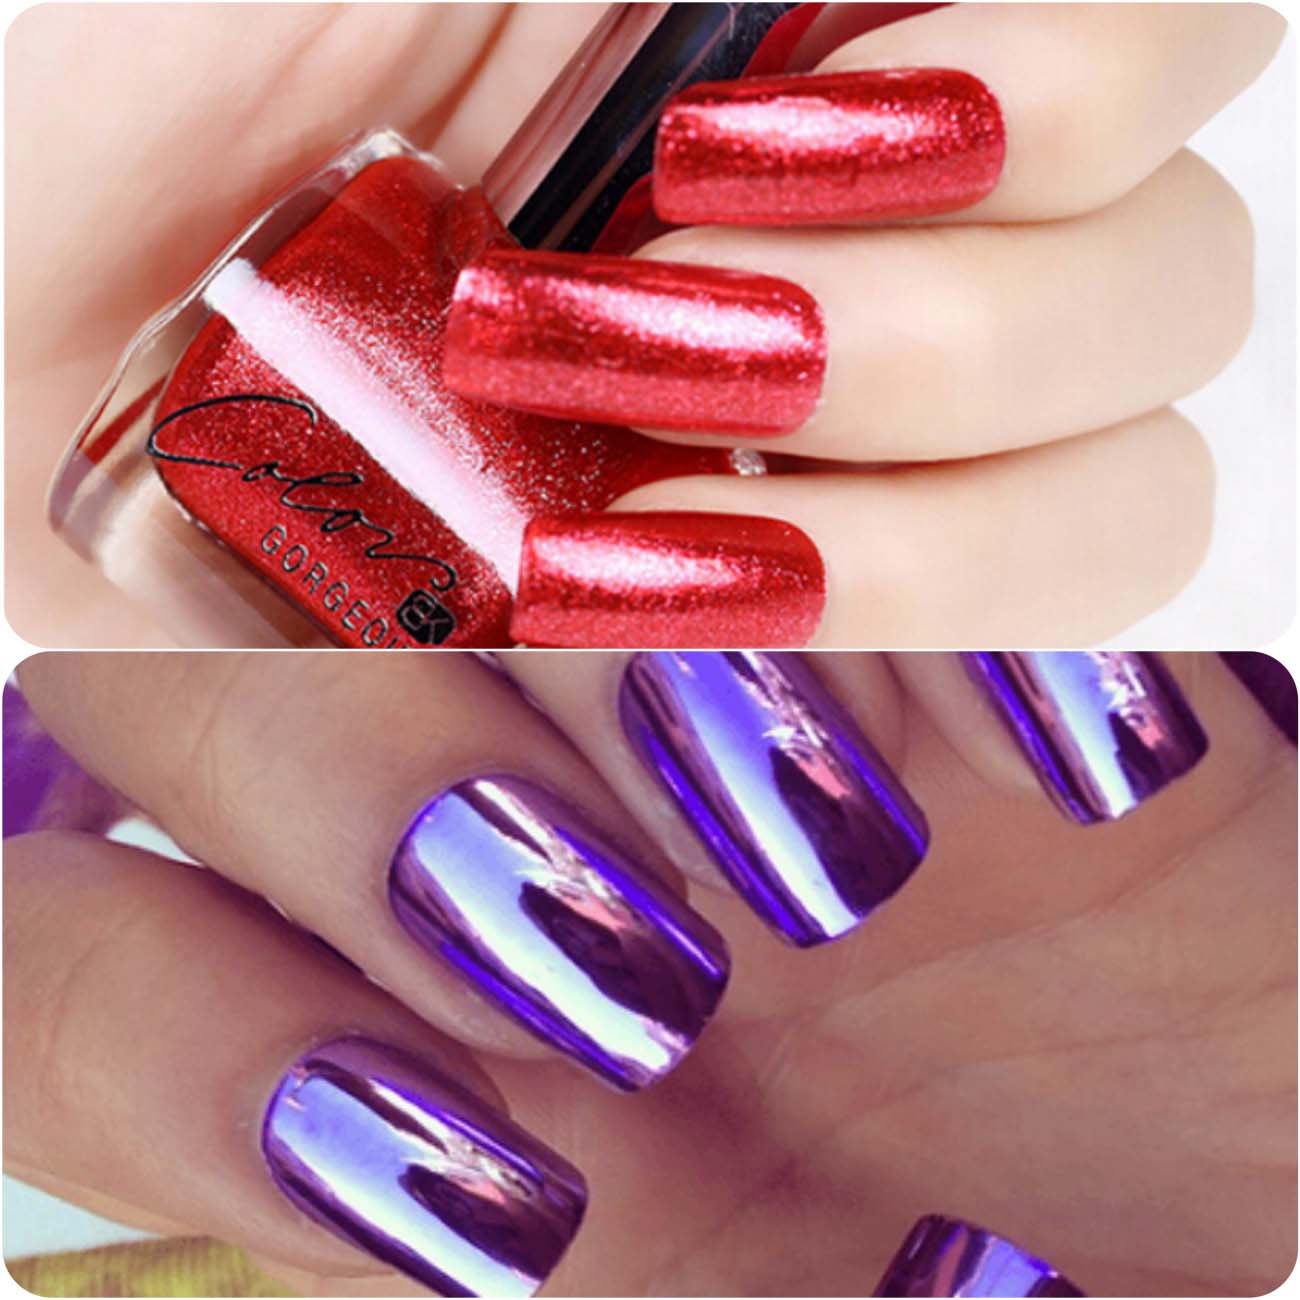 dazzling nail art with mirror effects